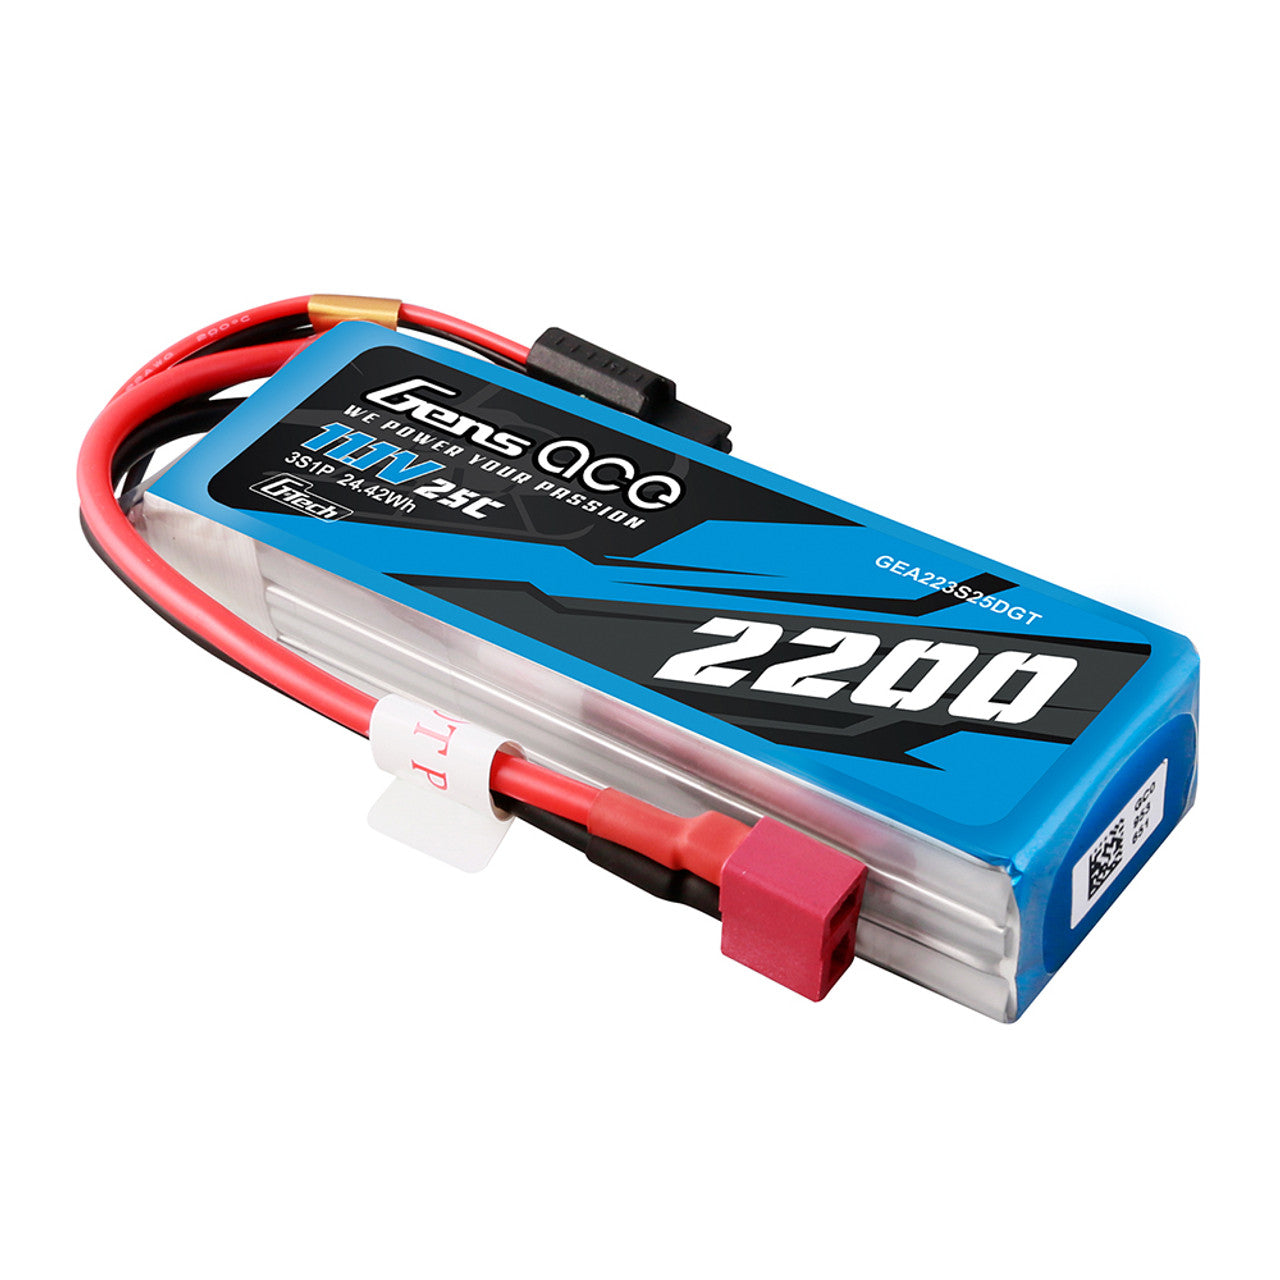 Gens Ace 2200mAh 3S 25C 11.1V G-Tech Lipo Battery Pack With Deans Plug